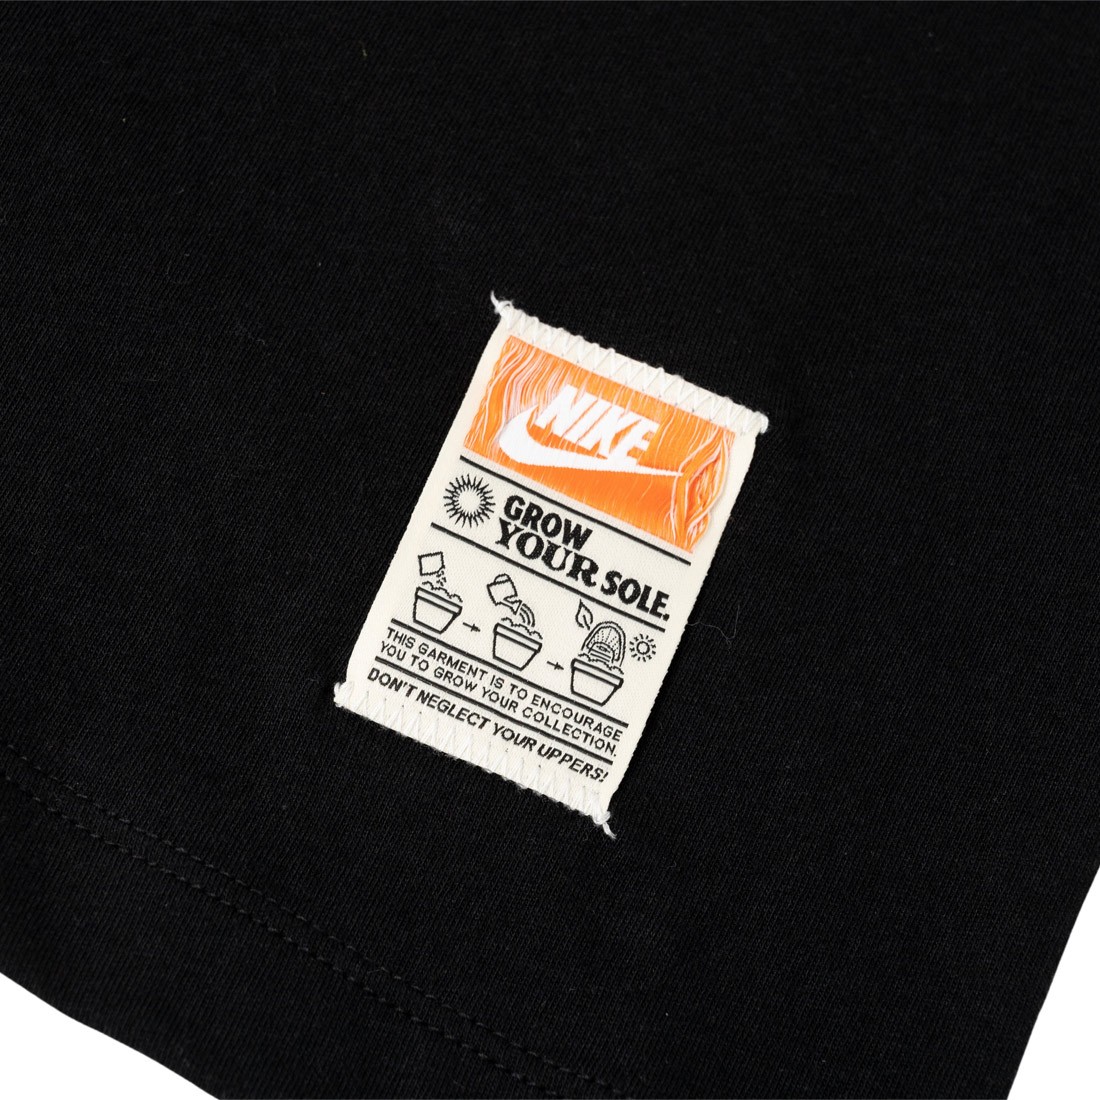 Stüssy has confirmed the drop at Nike and selected retailers